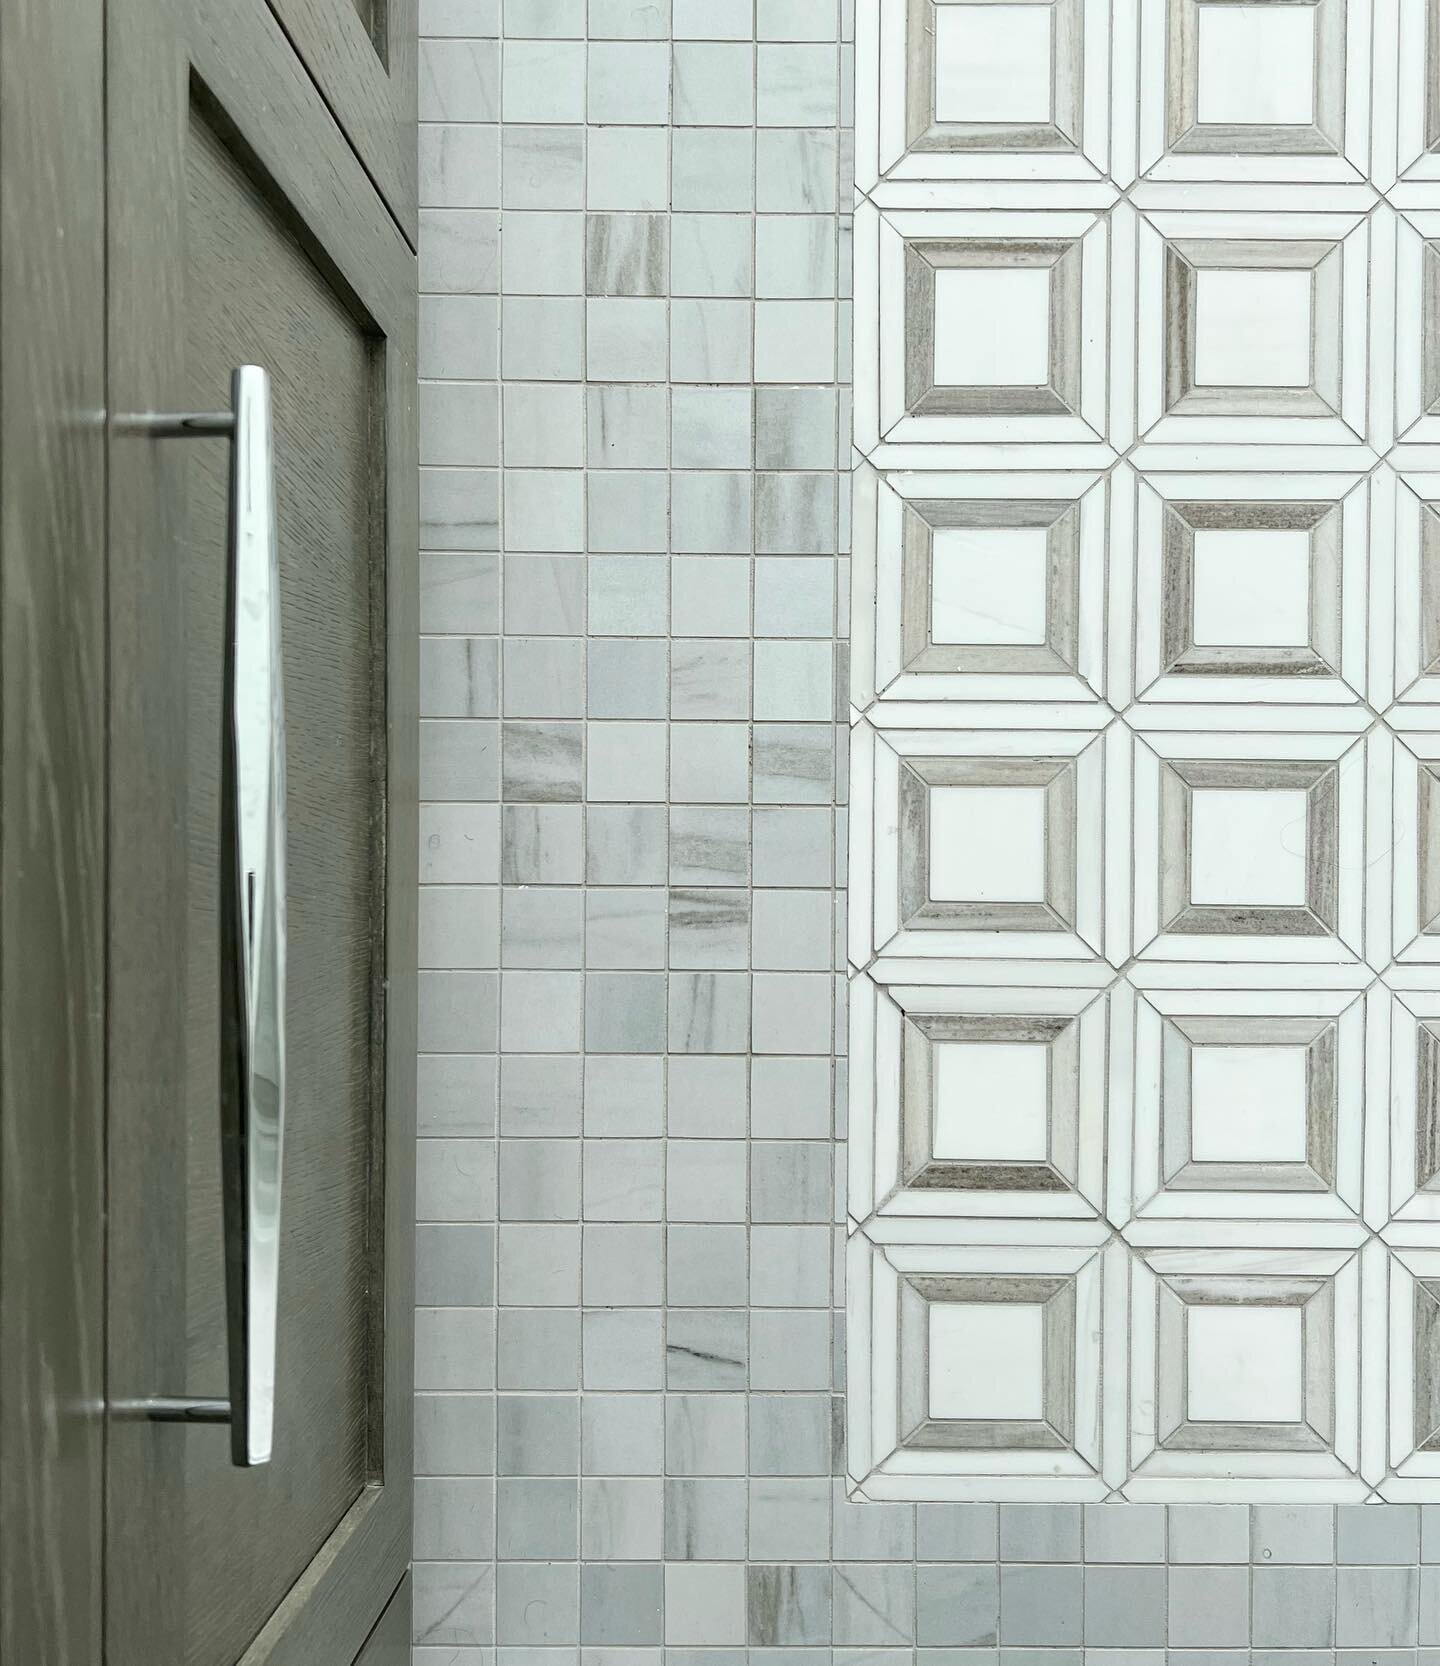 We finally photographed this beautiful bathroom and are anxiously waiting on the images. Sneak peek of the tile work on this #transitional main bathroom we wrapped up late last year.

#tiledetail #bathroomdesign #mainbathroom #interiors #interiordesi